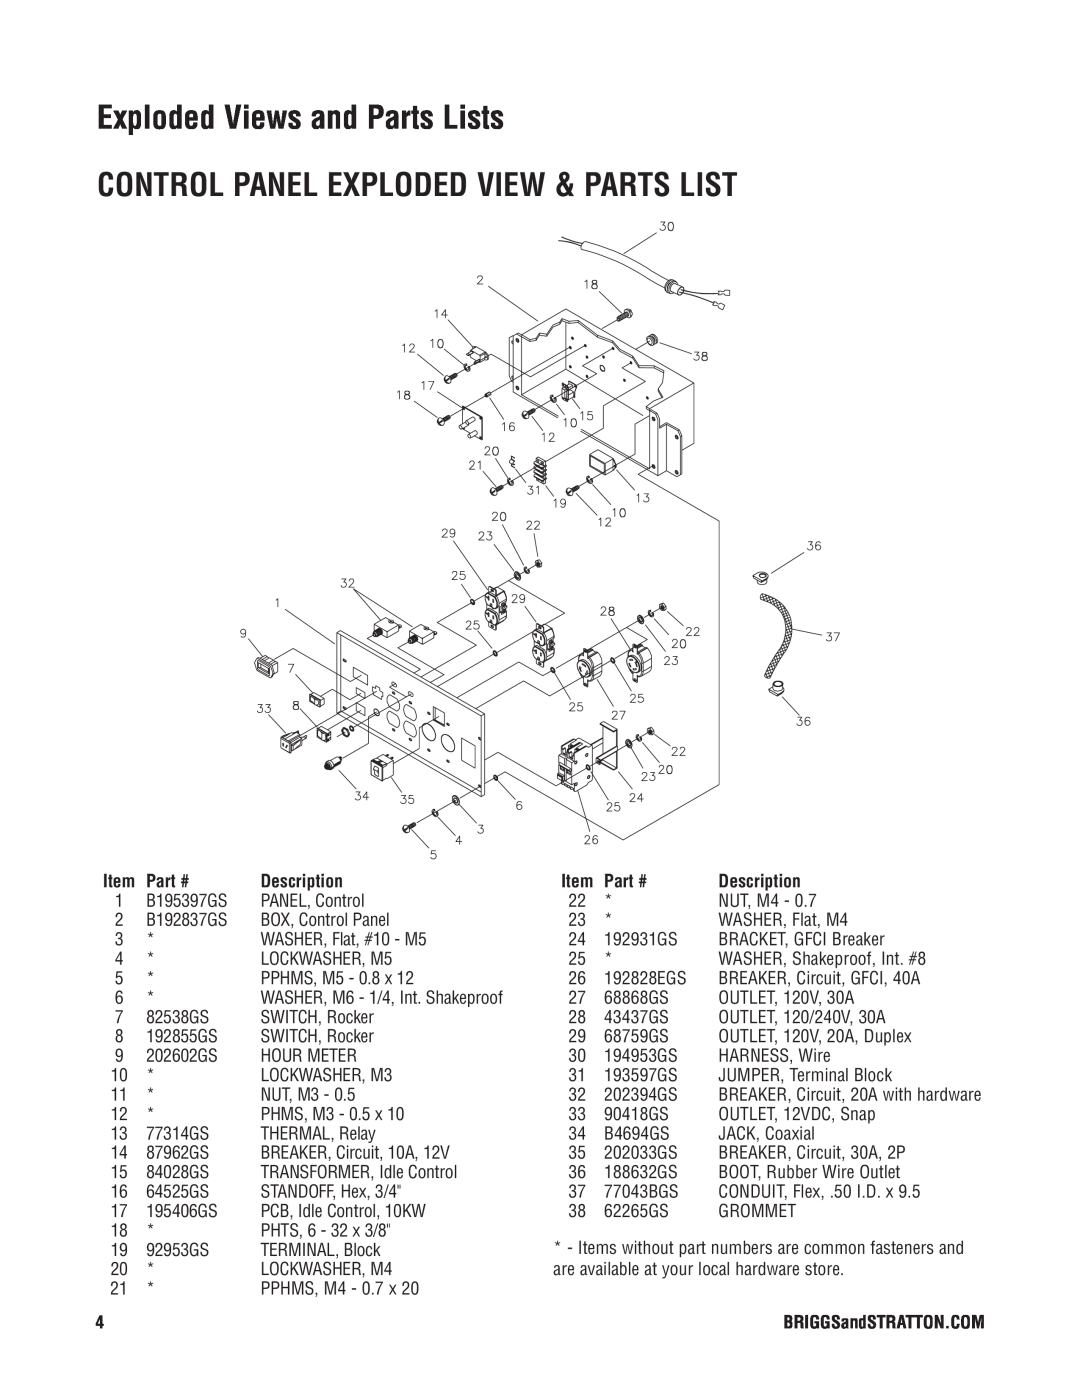 Briggs & Stratton 30382 manual Control Panel Exploded View & Parts List, Exploded Views and Parts Lists, Description 